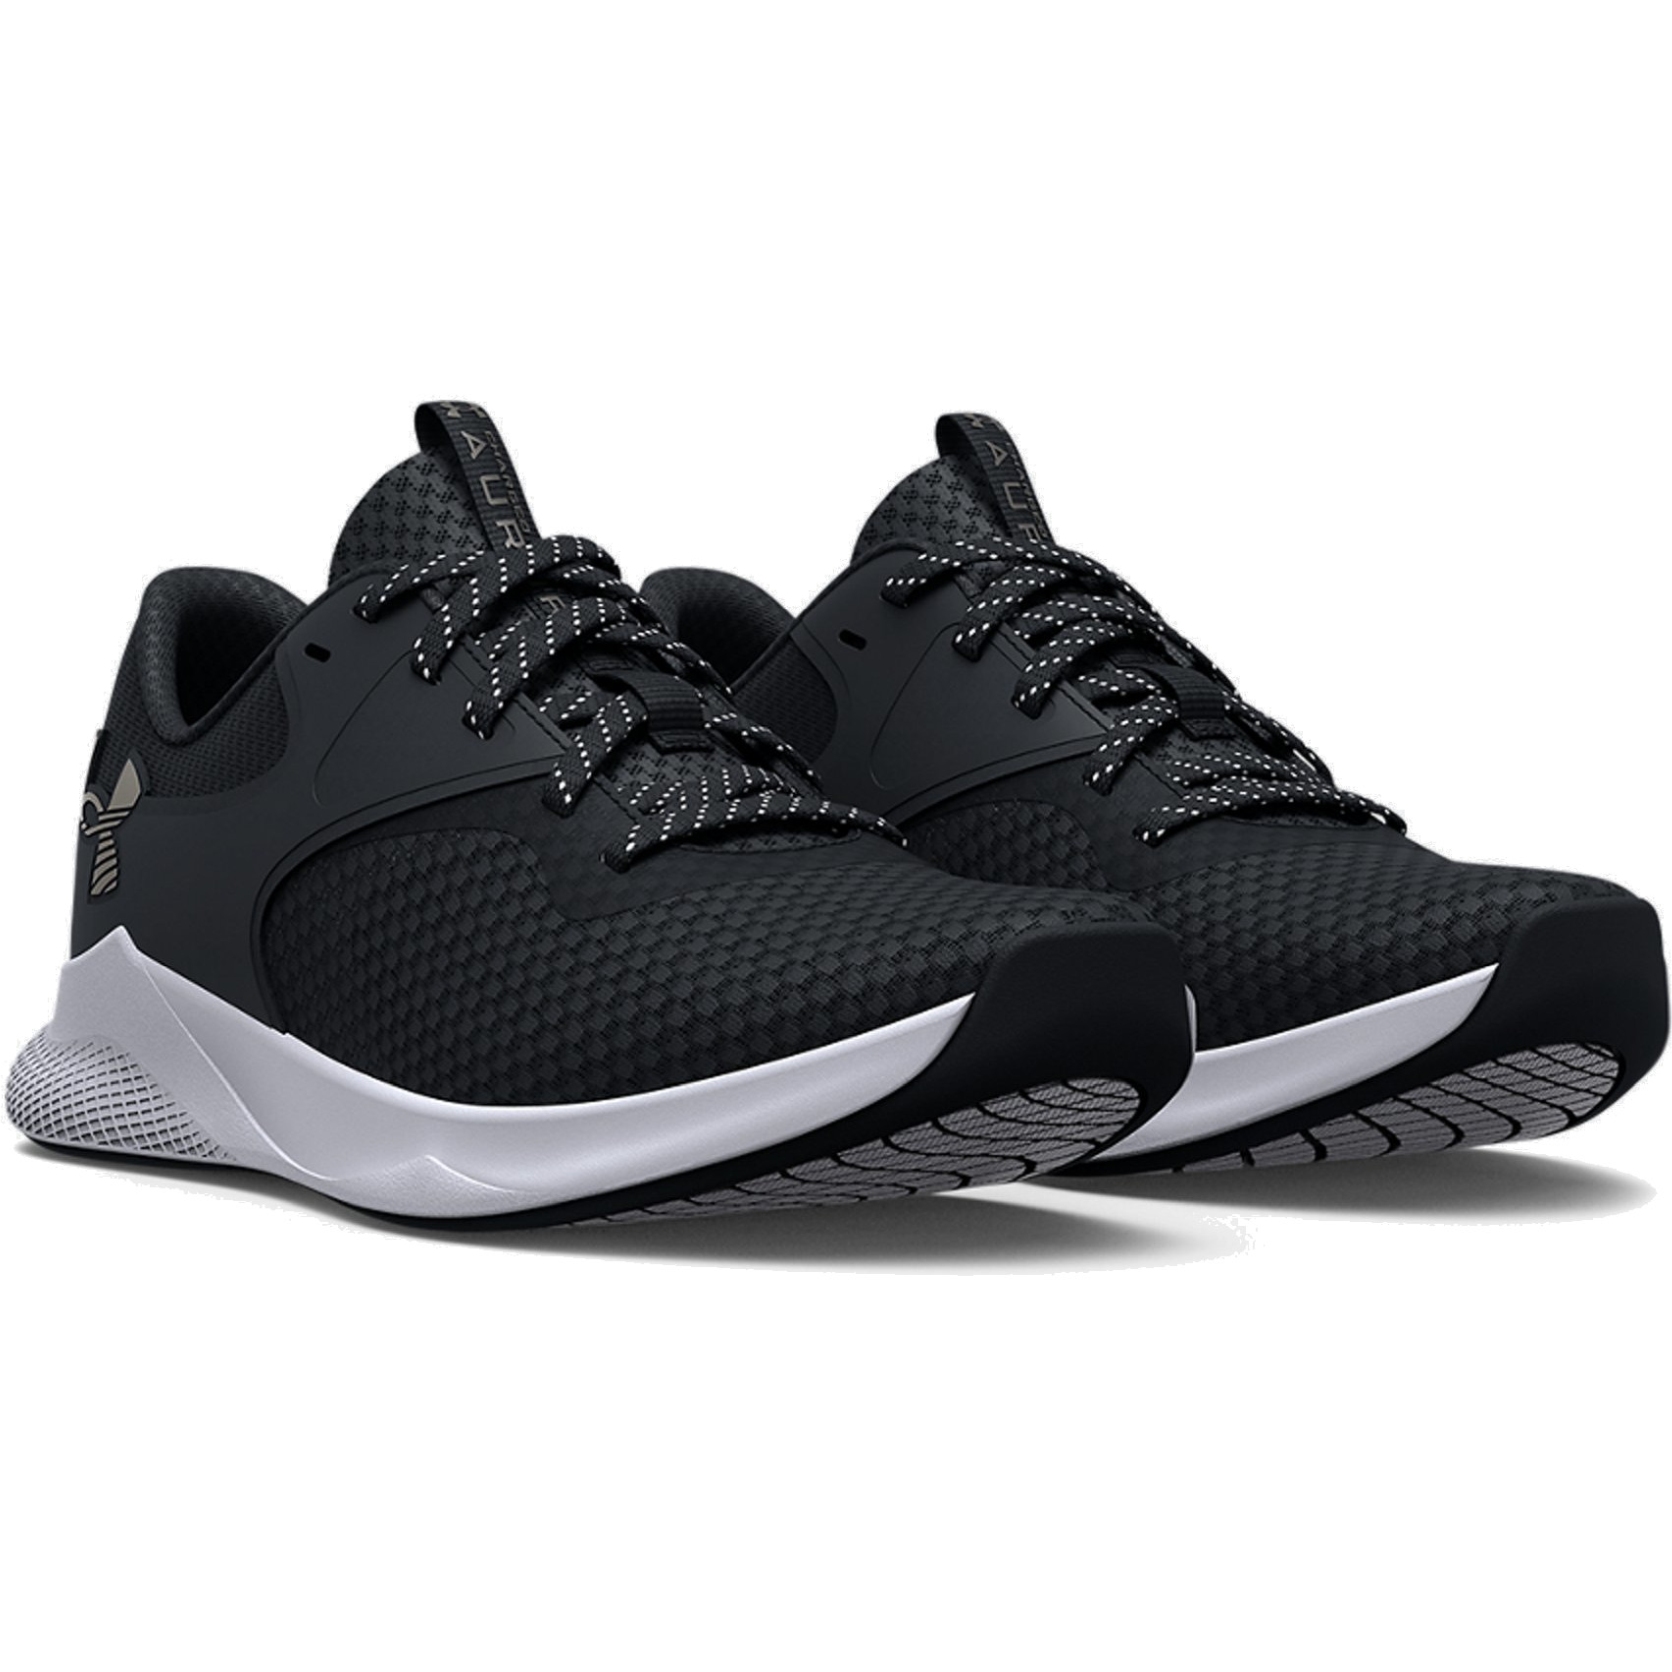 Picture of Under Armour UA Charged Aurora 2 Training Shoes Women - Black/Black/Metallic Warm Silver